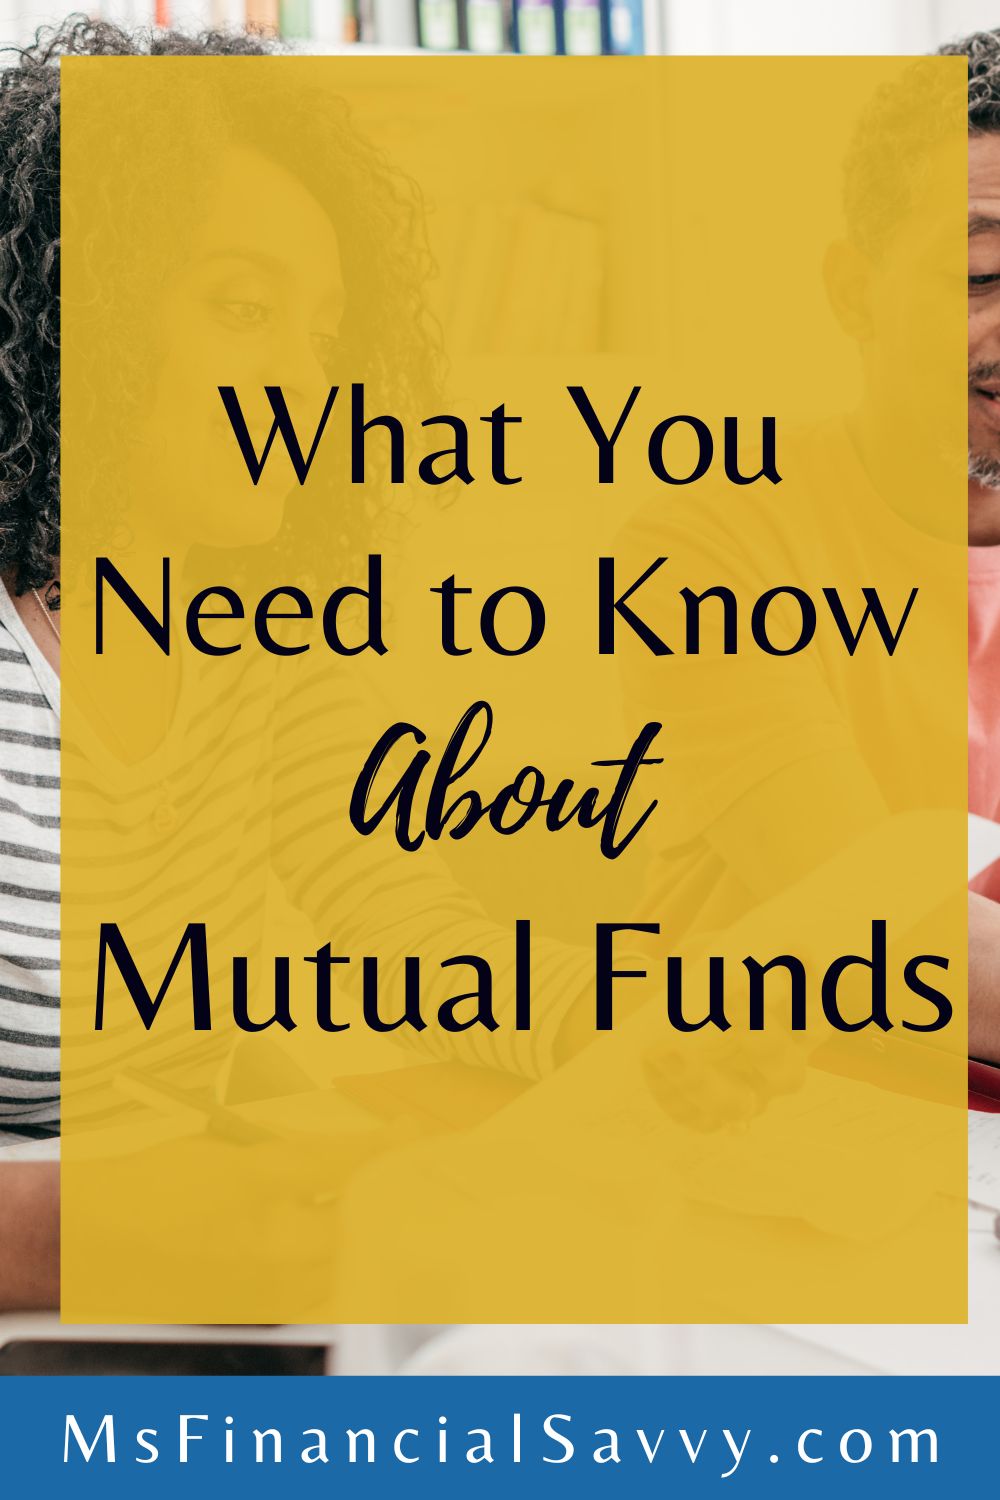 What You Need to Know About Mutual Funds